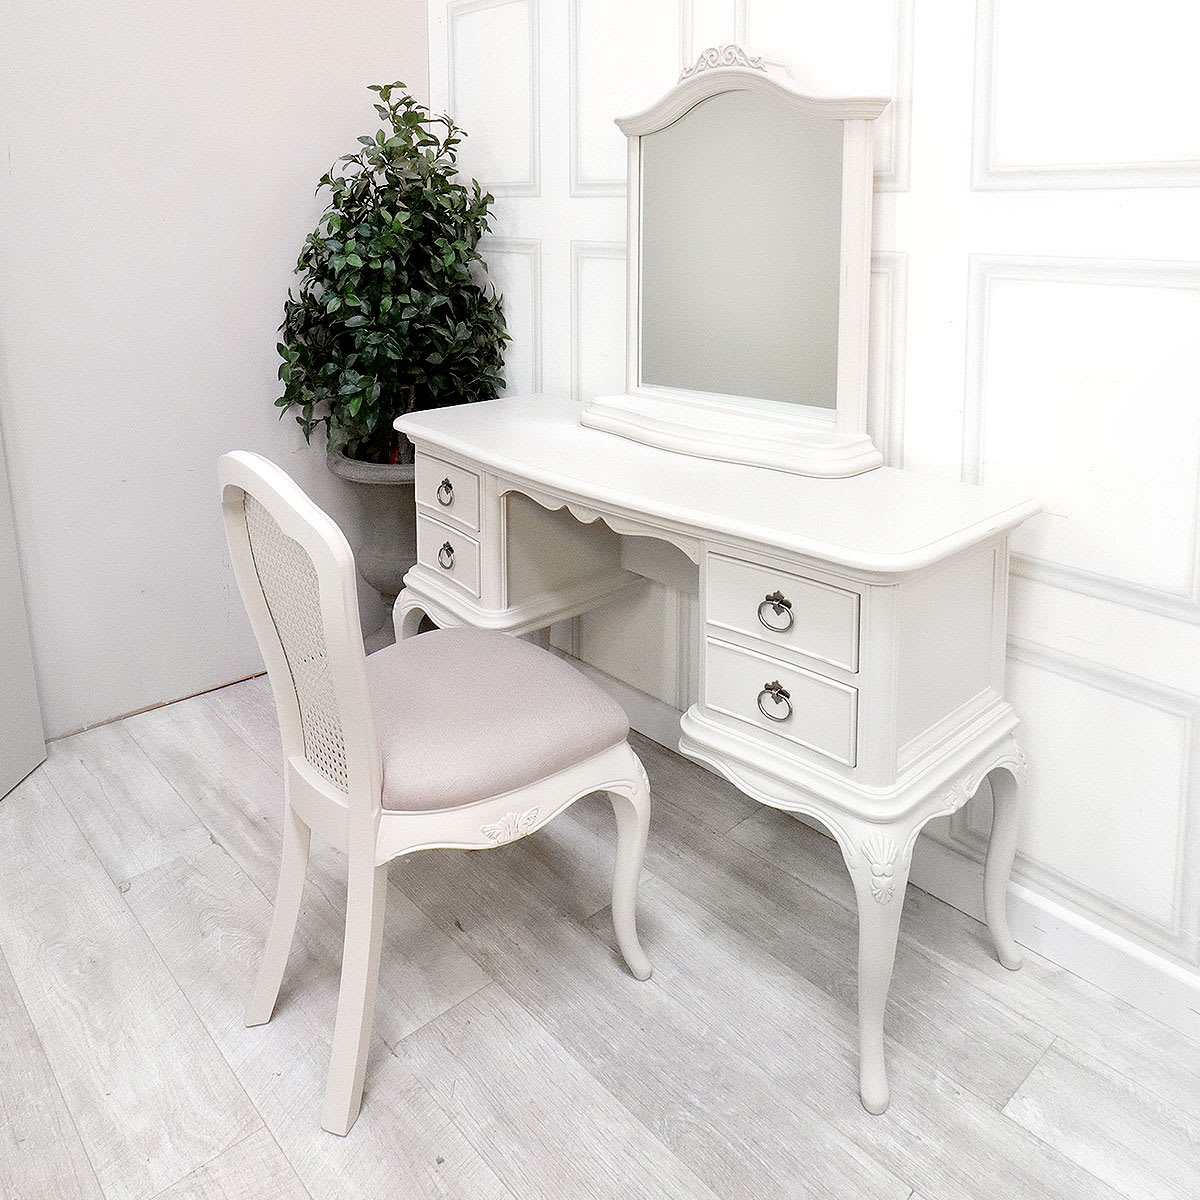 Willis & Gambier Etienne Grey Dressing Table, Chair and Mirror